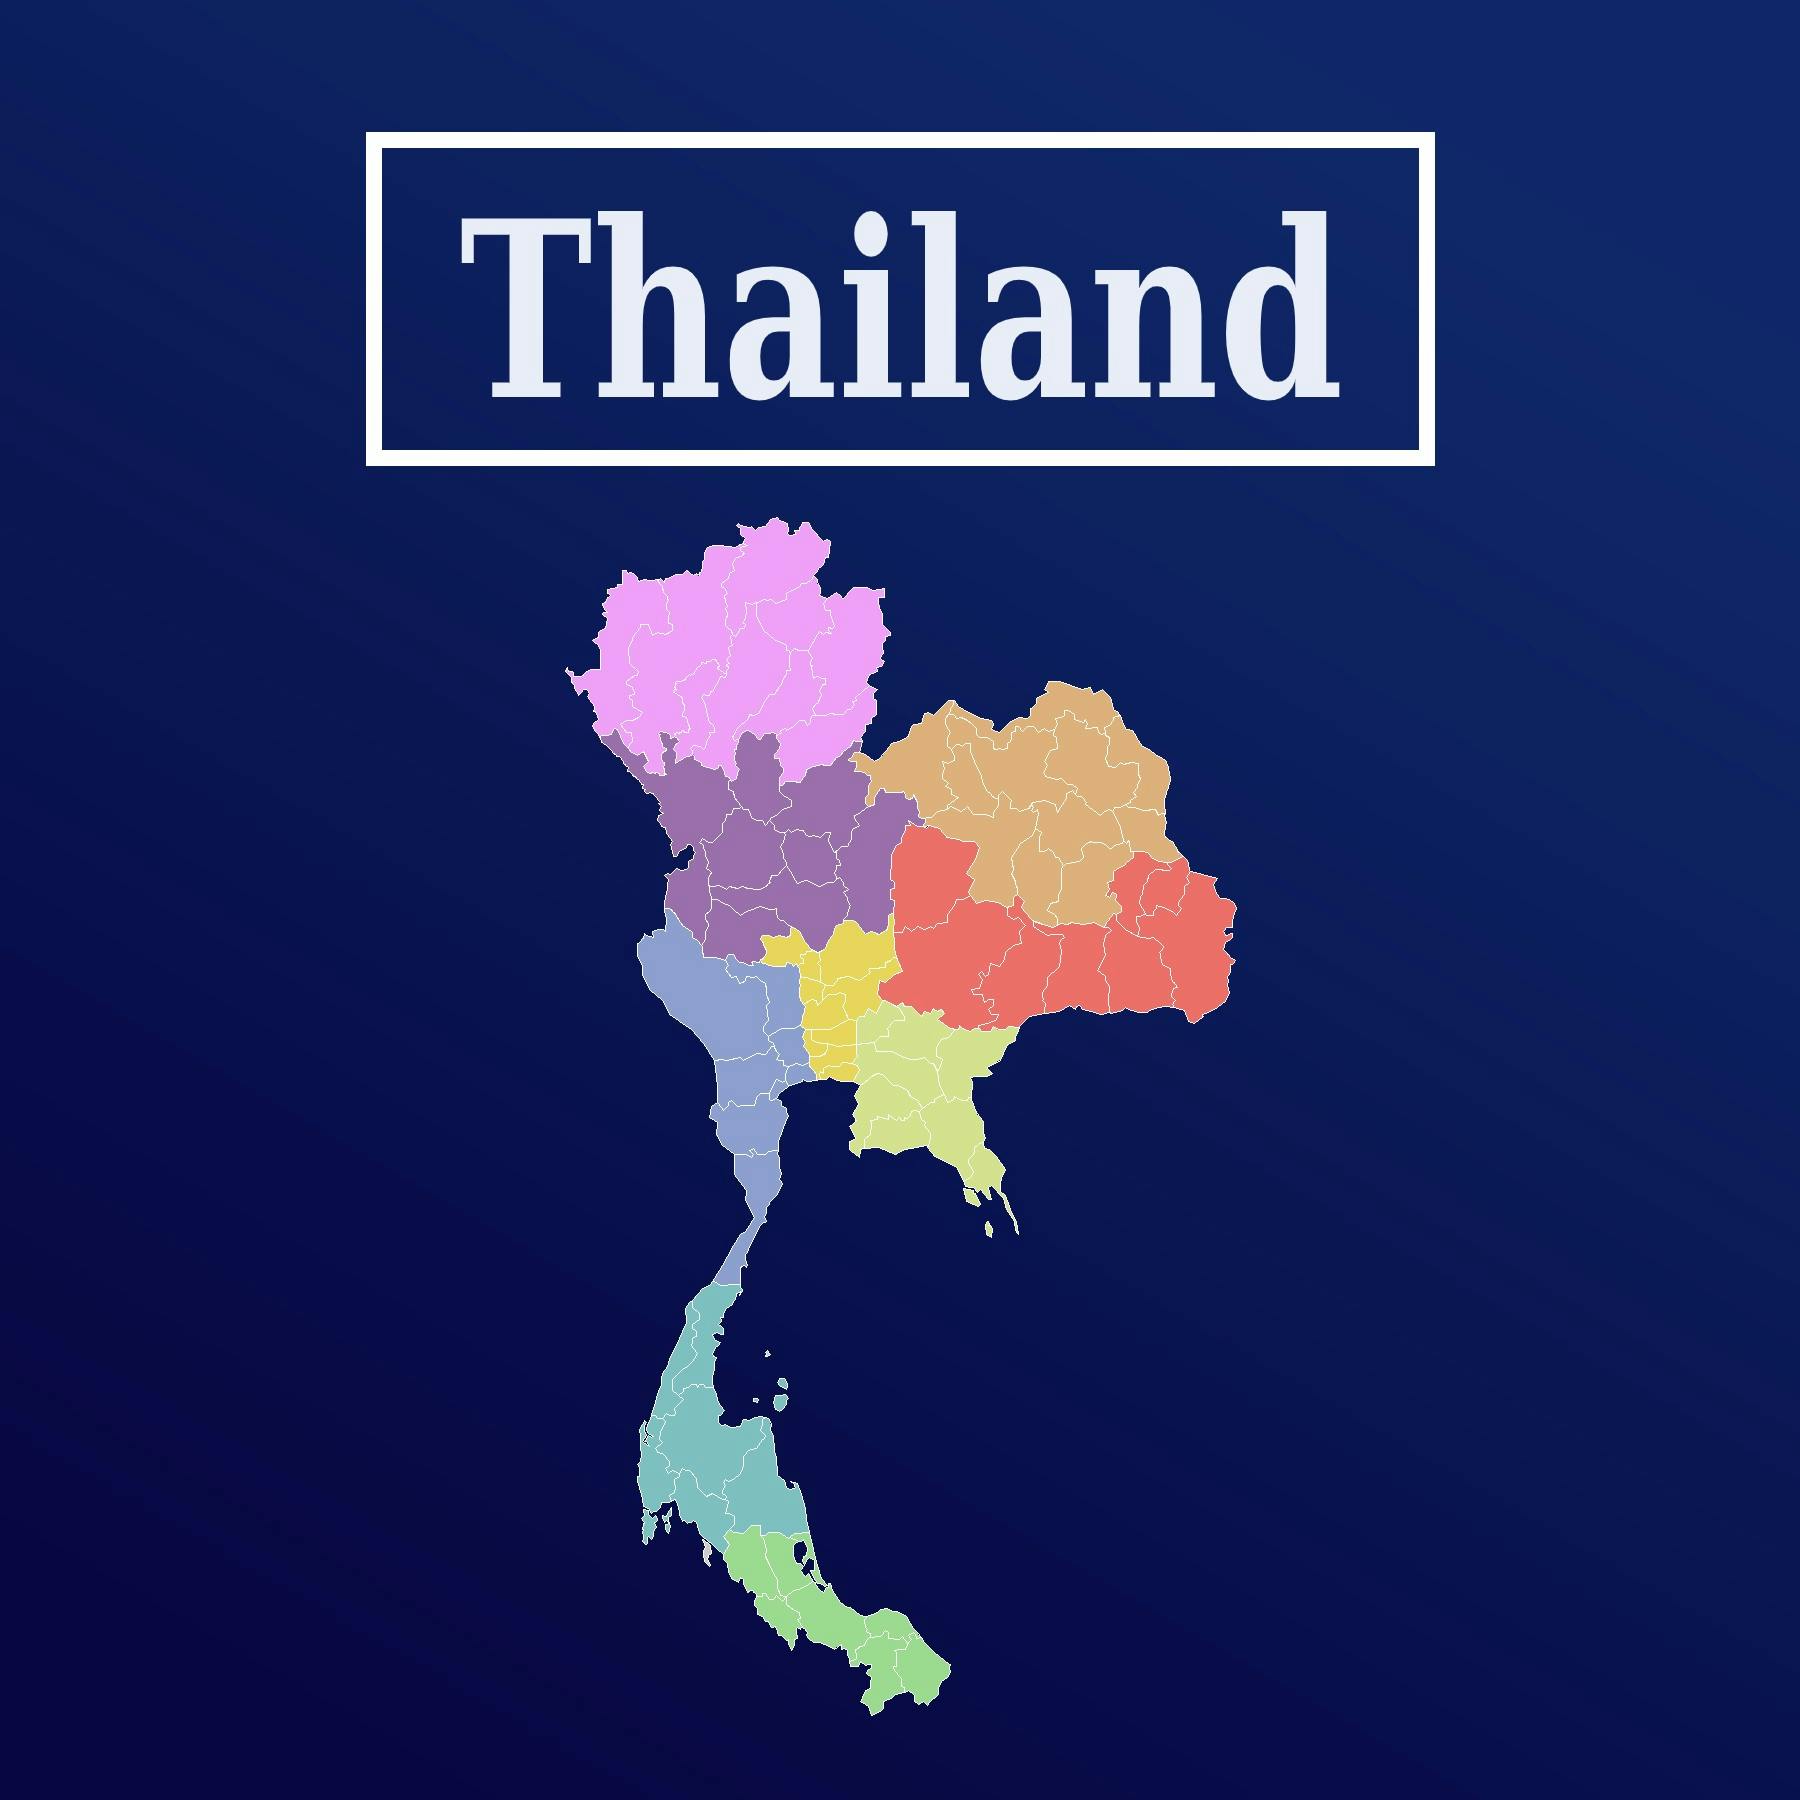 Episode 14: Paul Chambers on Thai Military and Security